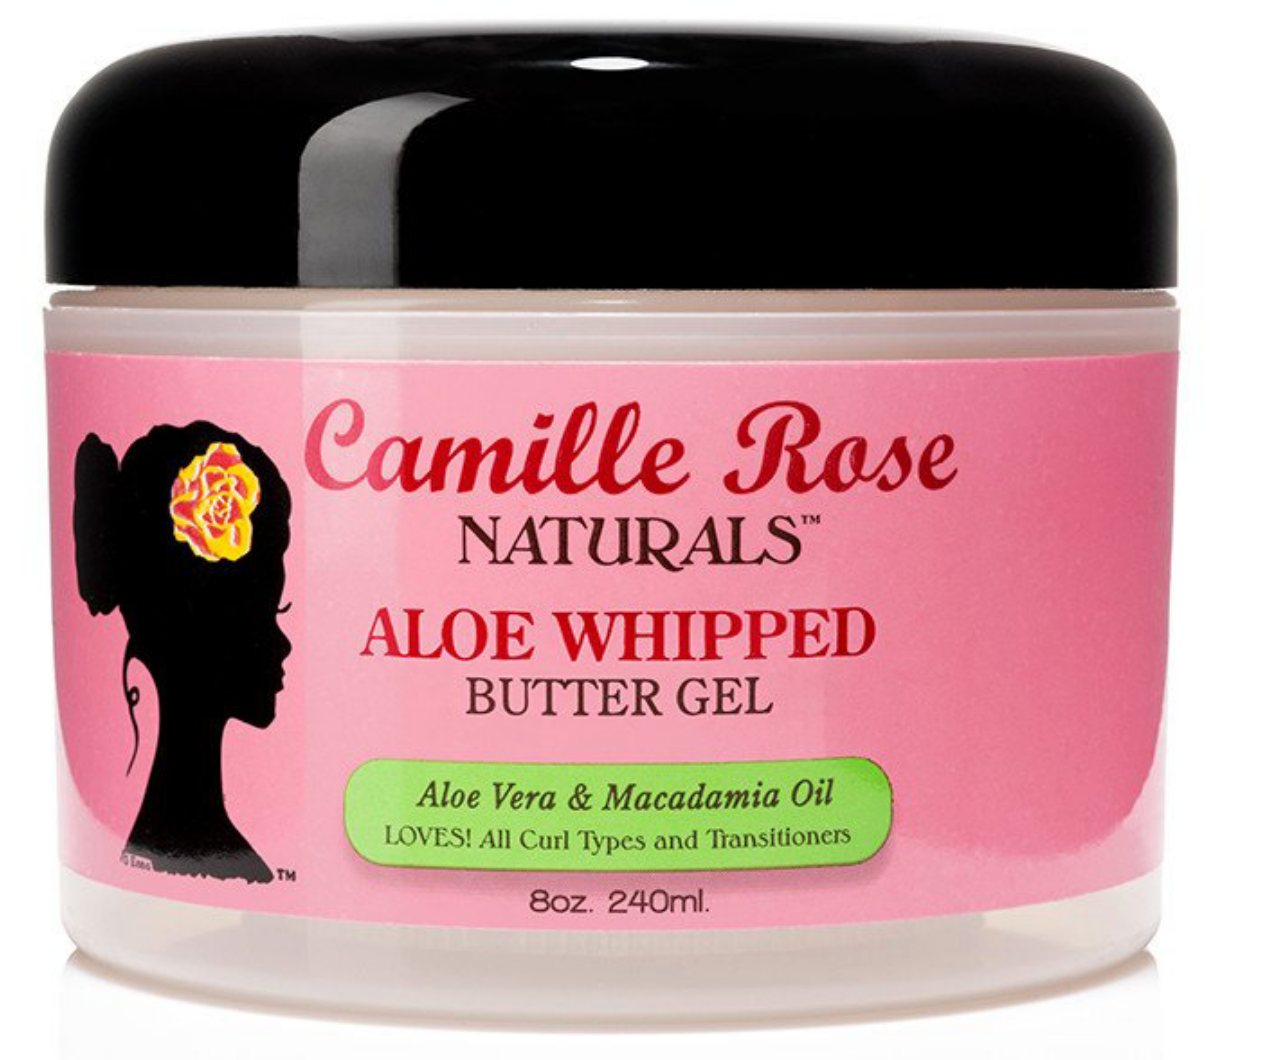 Camille Rose Naturals - Aloe Whipped Butter Gel - 8 Oz